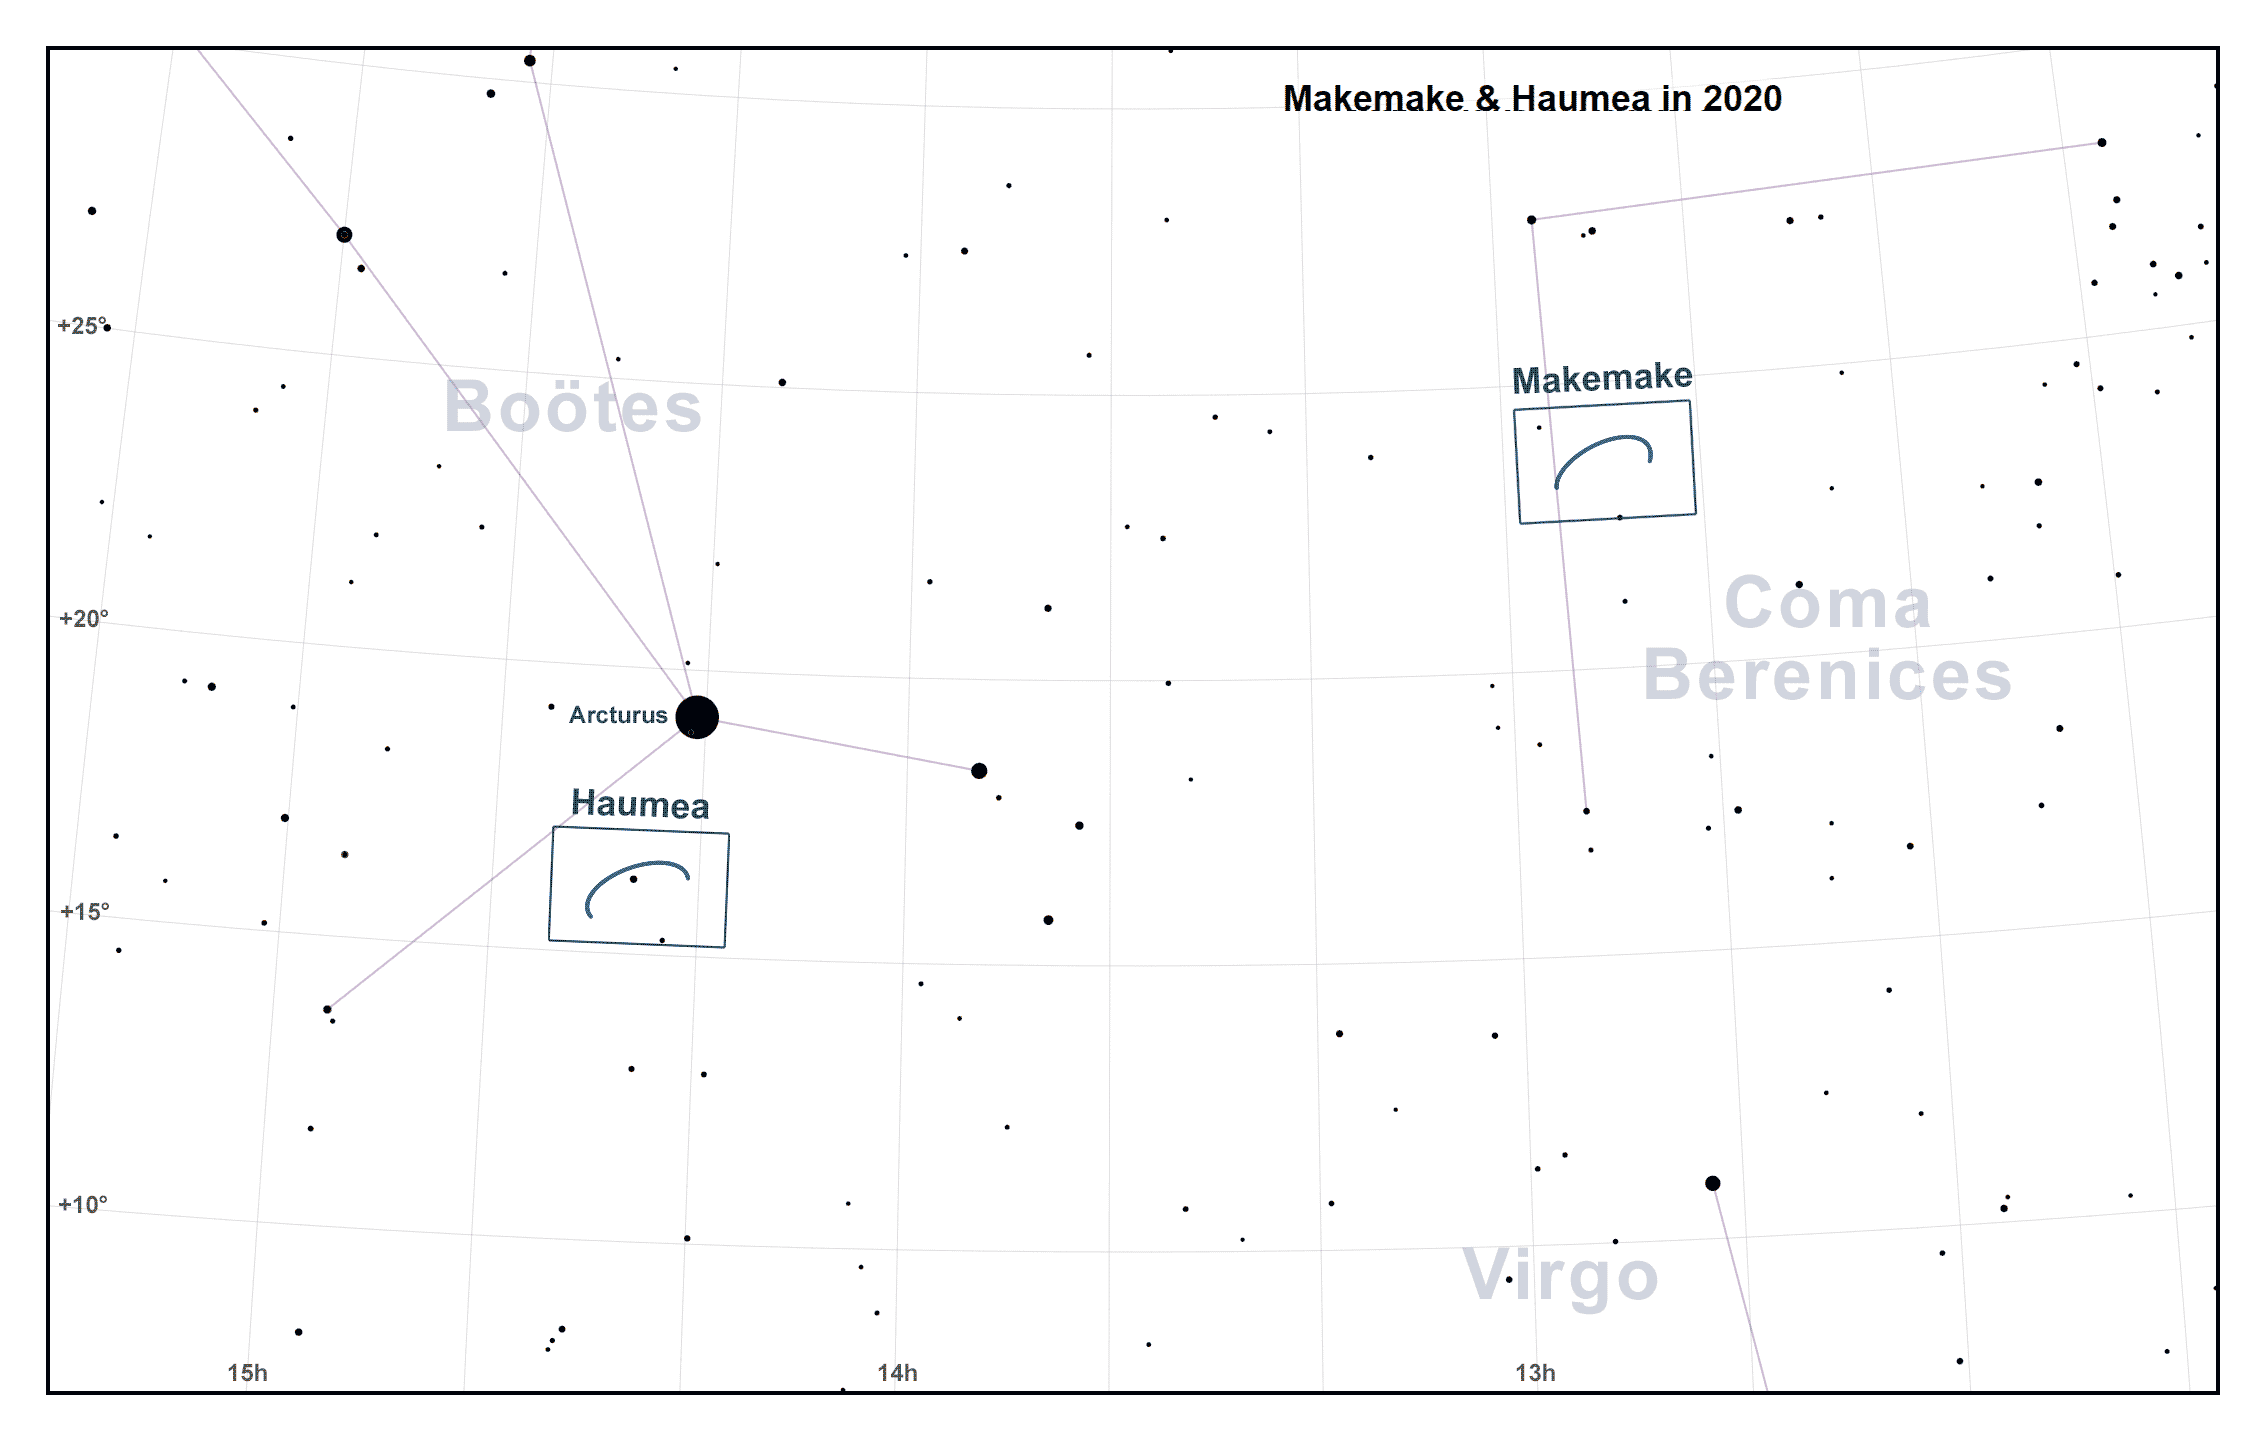 Chart showing locations of Makemake and Haumea in 2020